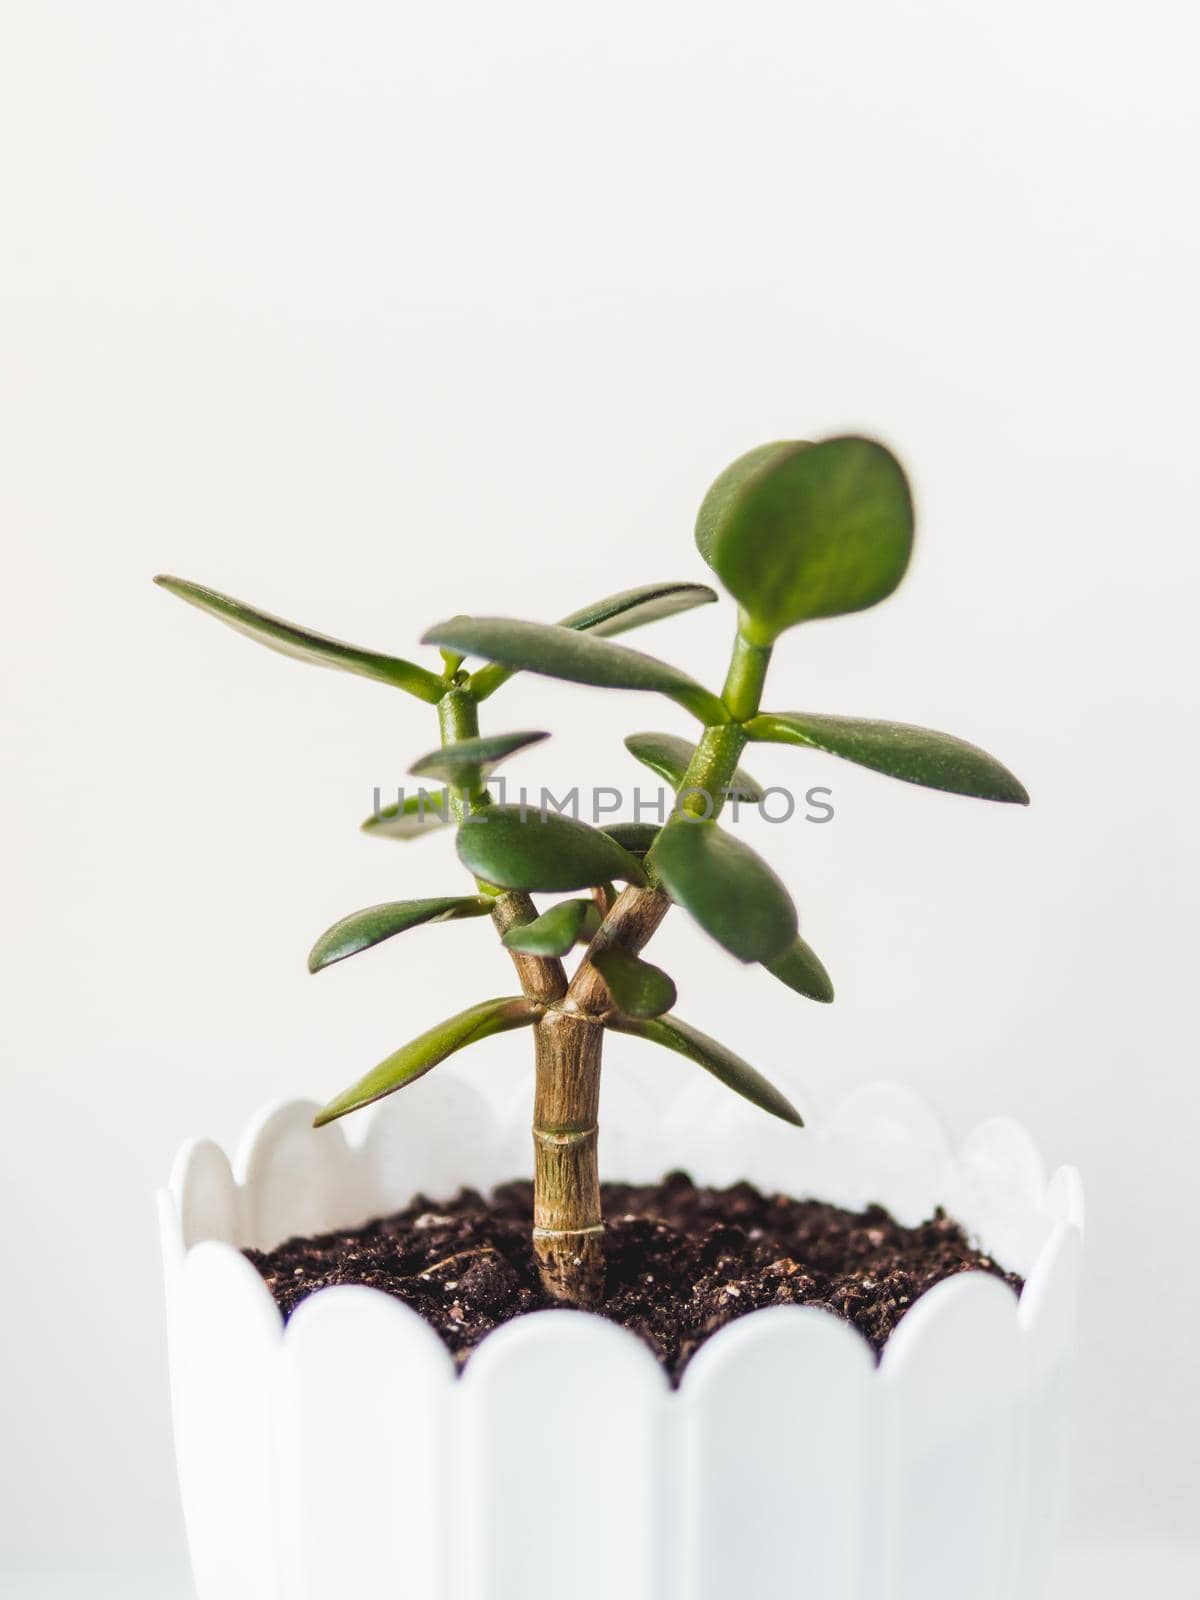 Flower pot with forked Crassula. Succulent plant on white background. Green leaves of money tree, symbol of luck. Peaceful botanical hobby. Gardening at home.